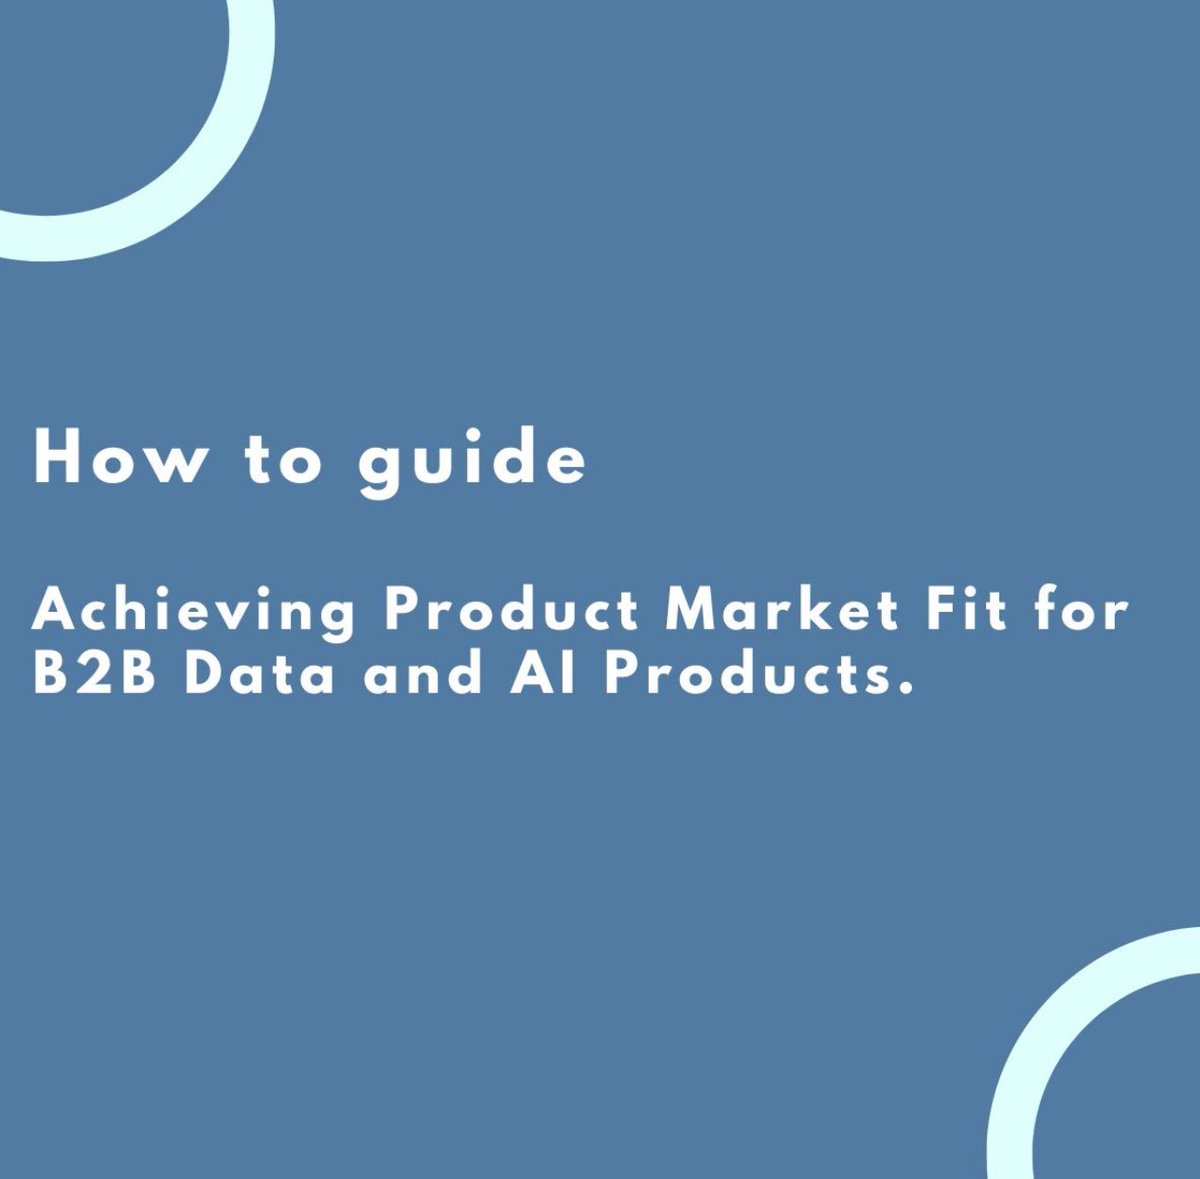 Achieving Product-Market Fit for B2B Data and AI Products: A Concise Guide. Link to learn more in the comments section. #productmarketfit #productmanagement #b2bdata #artificialintelligence